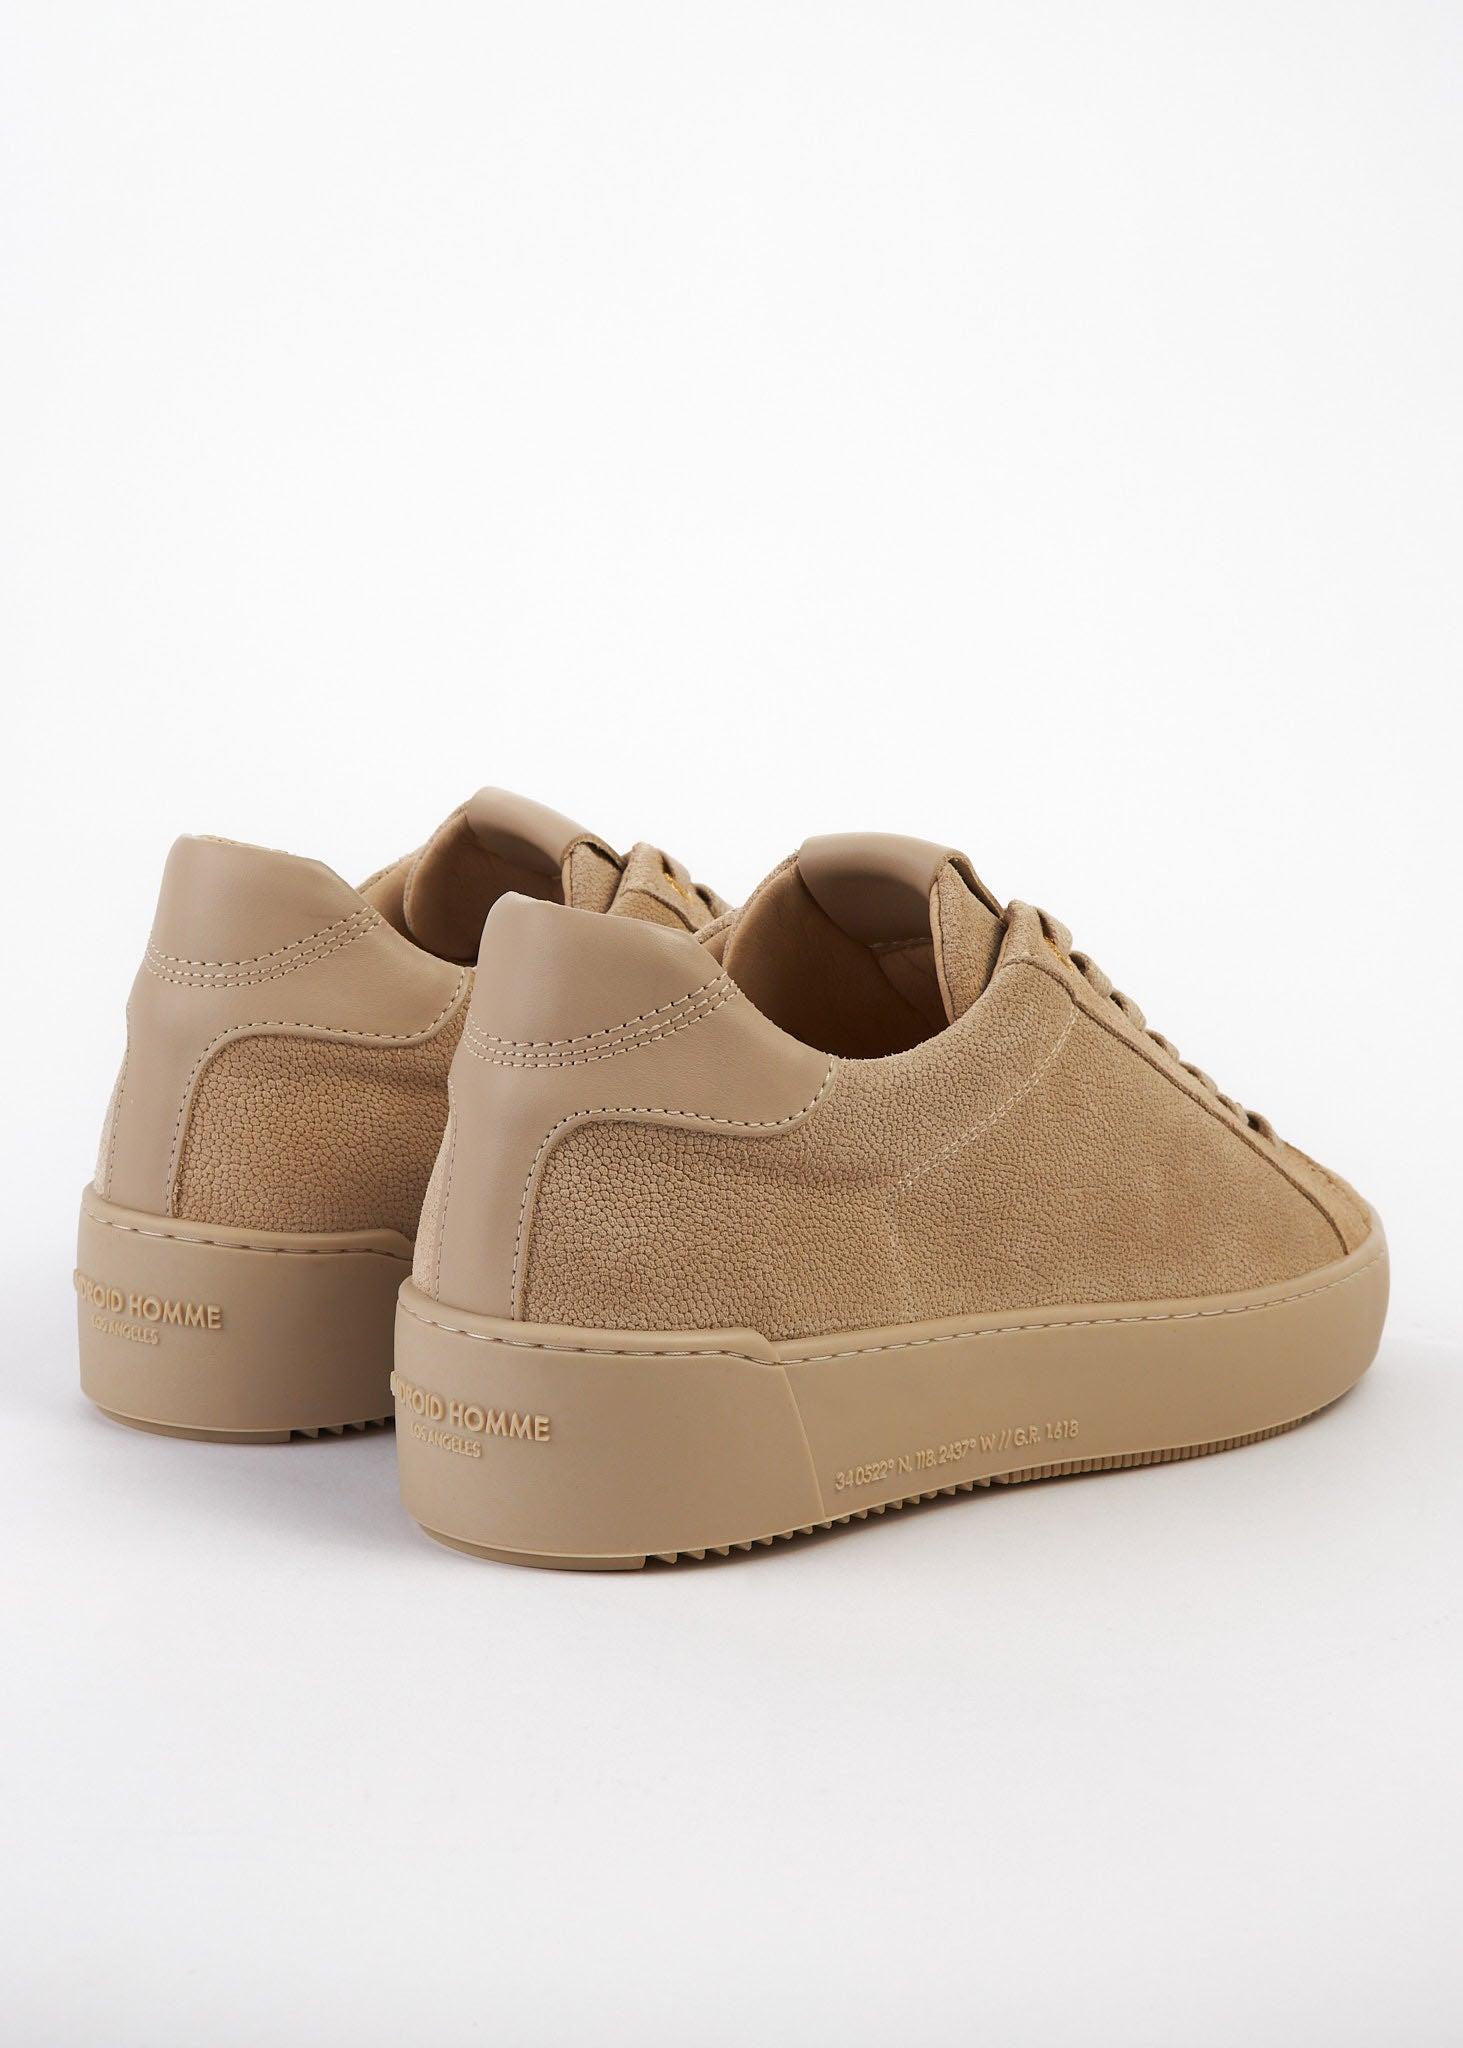 Android Homme Leather Zuma Trainer in Tan (Natural) for Men | Lyst